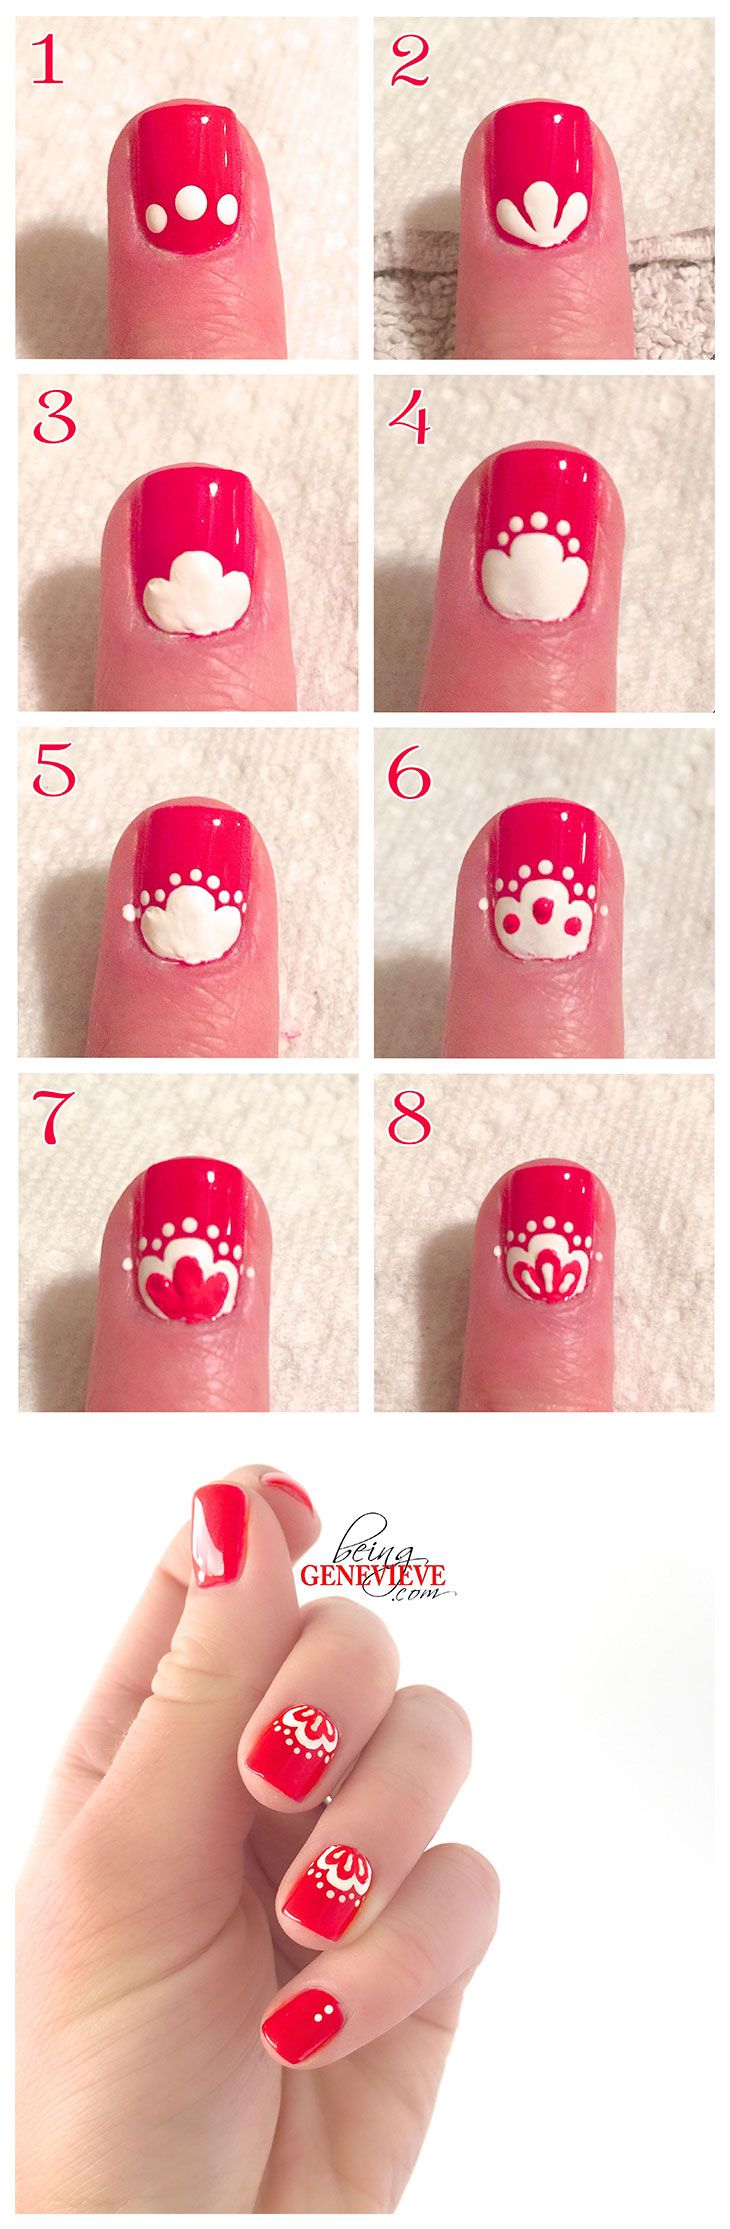 25 Easy Step by Step Nail Tutorials for Girls - Pretty Designs